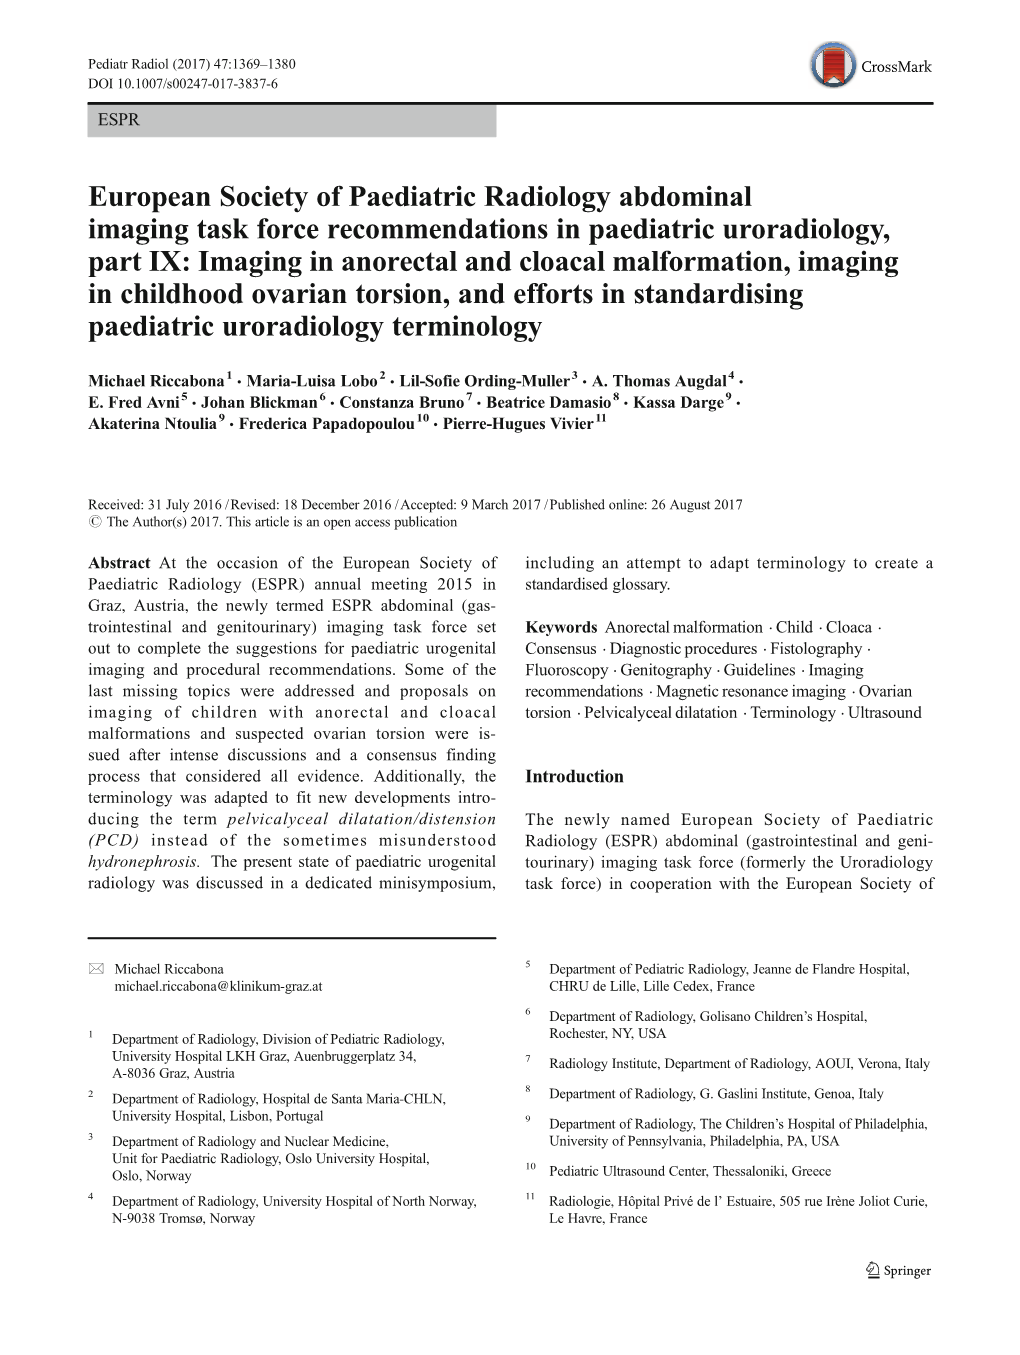 European Society of Paediatric Radiology Abdominal Imaging Task Force Recommendations in Paediatric Uroradiology, Part IX: Imagi